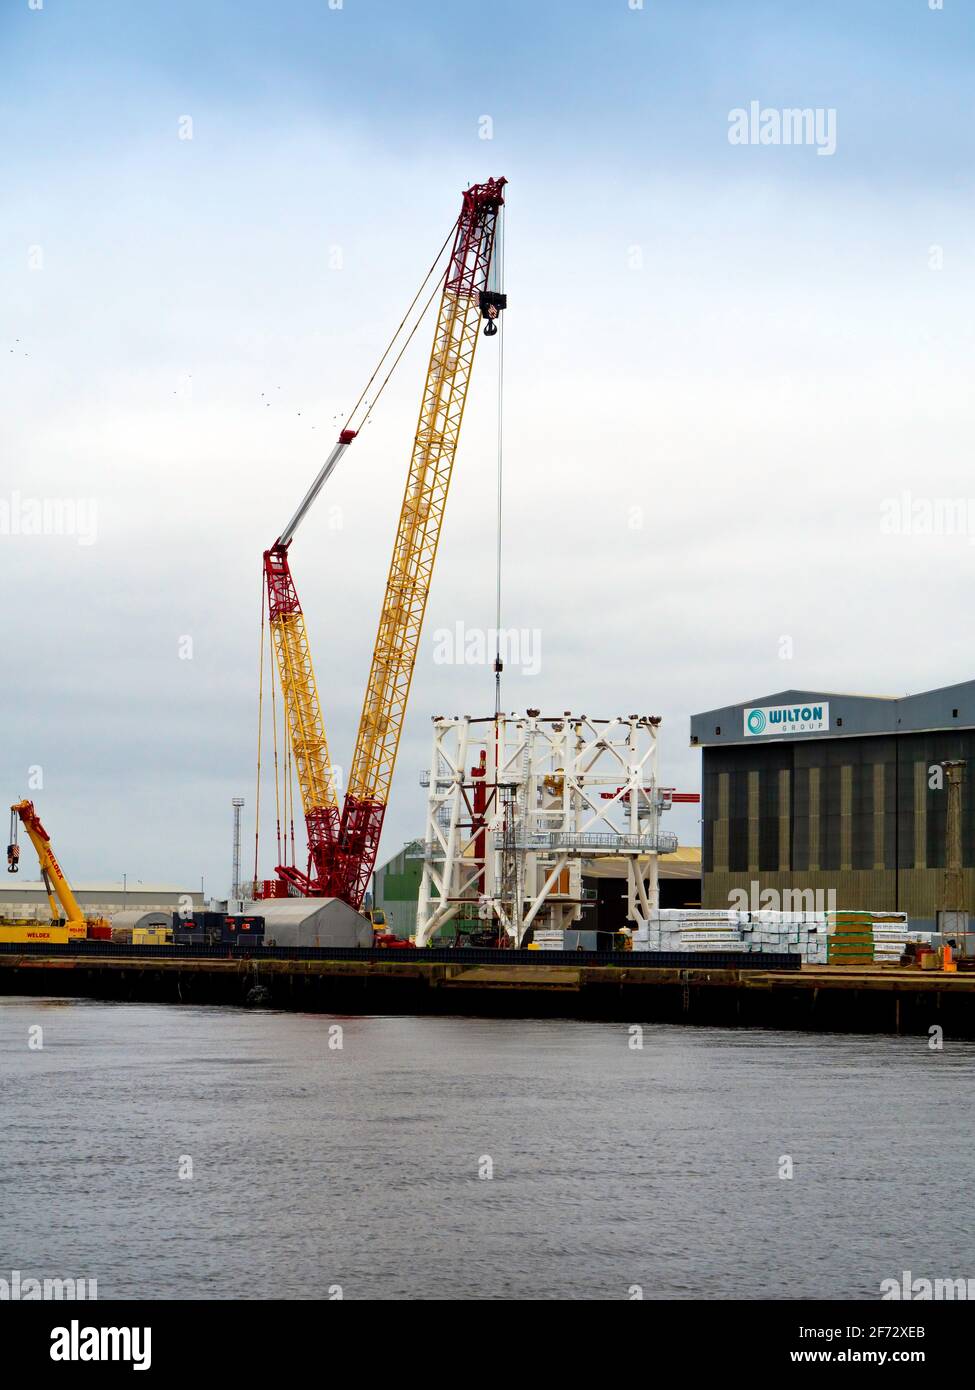 Large mobile crane on the quayside at Wilton Group fabrication yard with a white painted underwater structure at  Port Clarnce on the River Tees Stock Photo